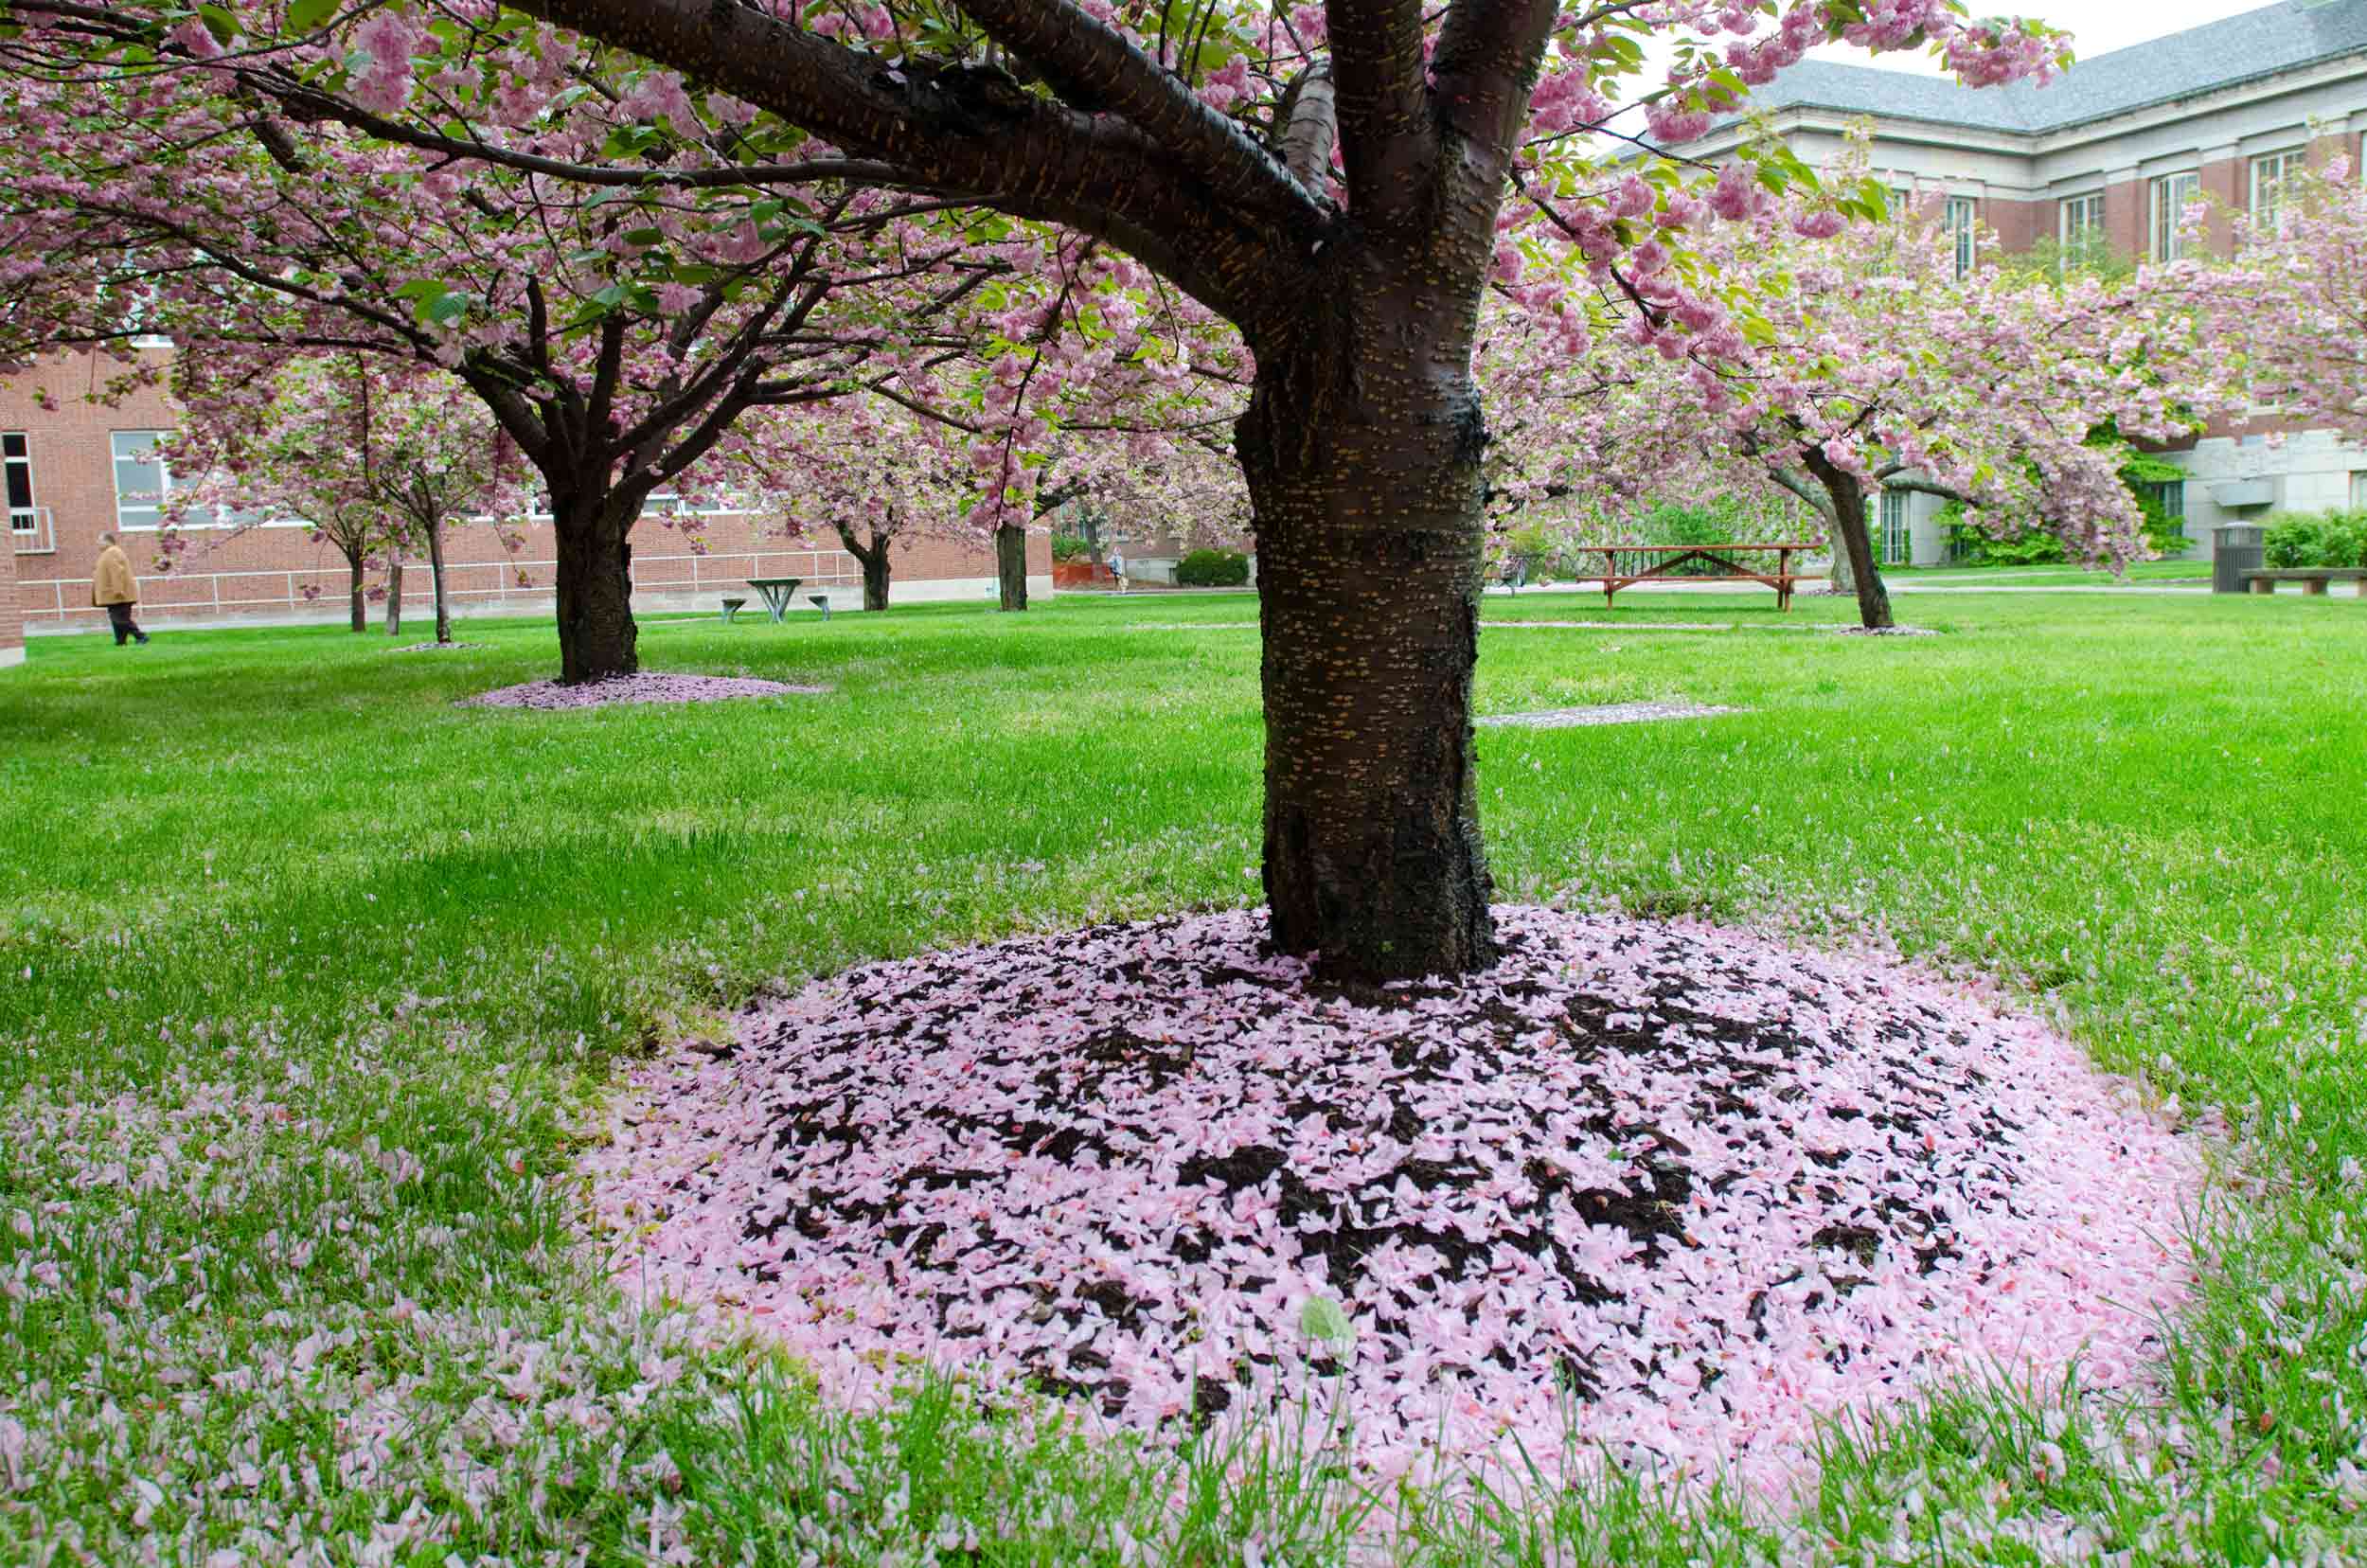 tree with pink flower petals at the base.